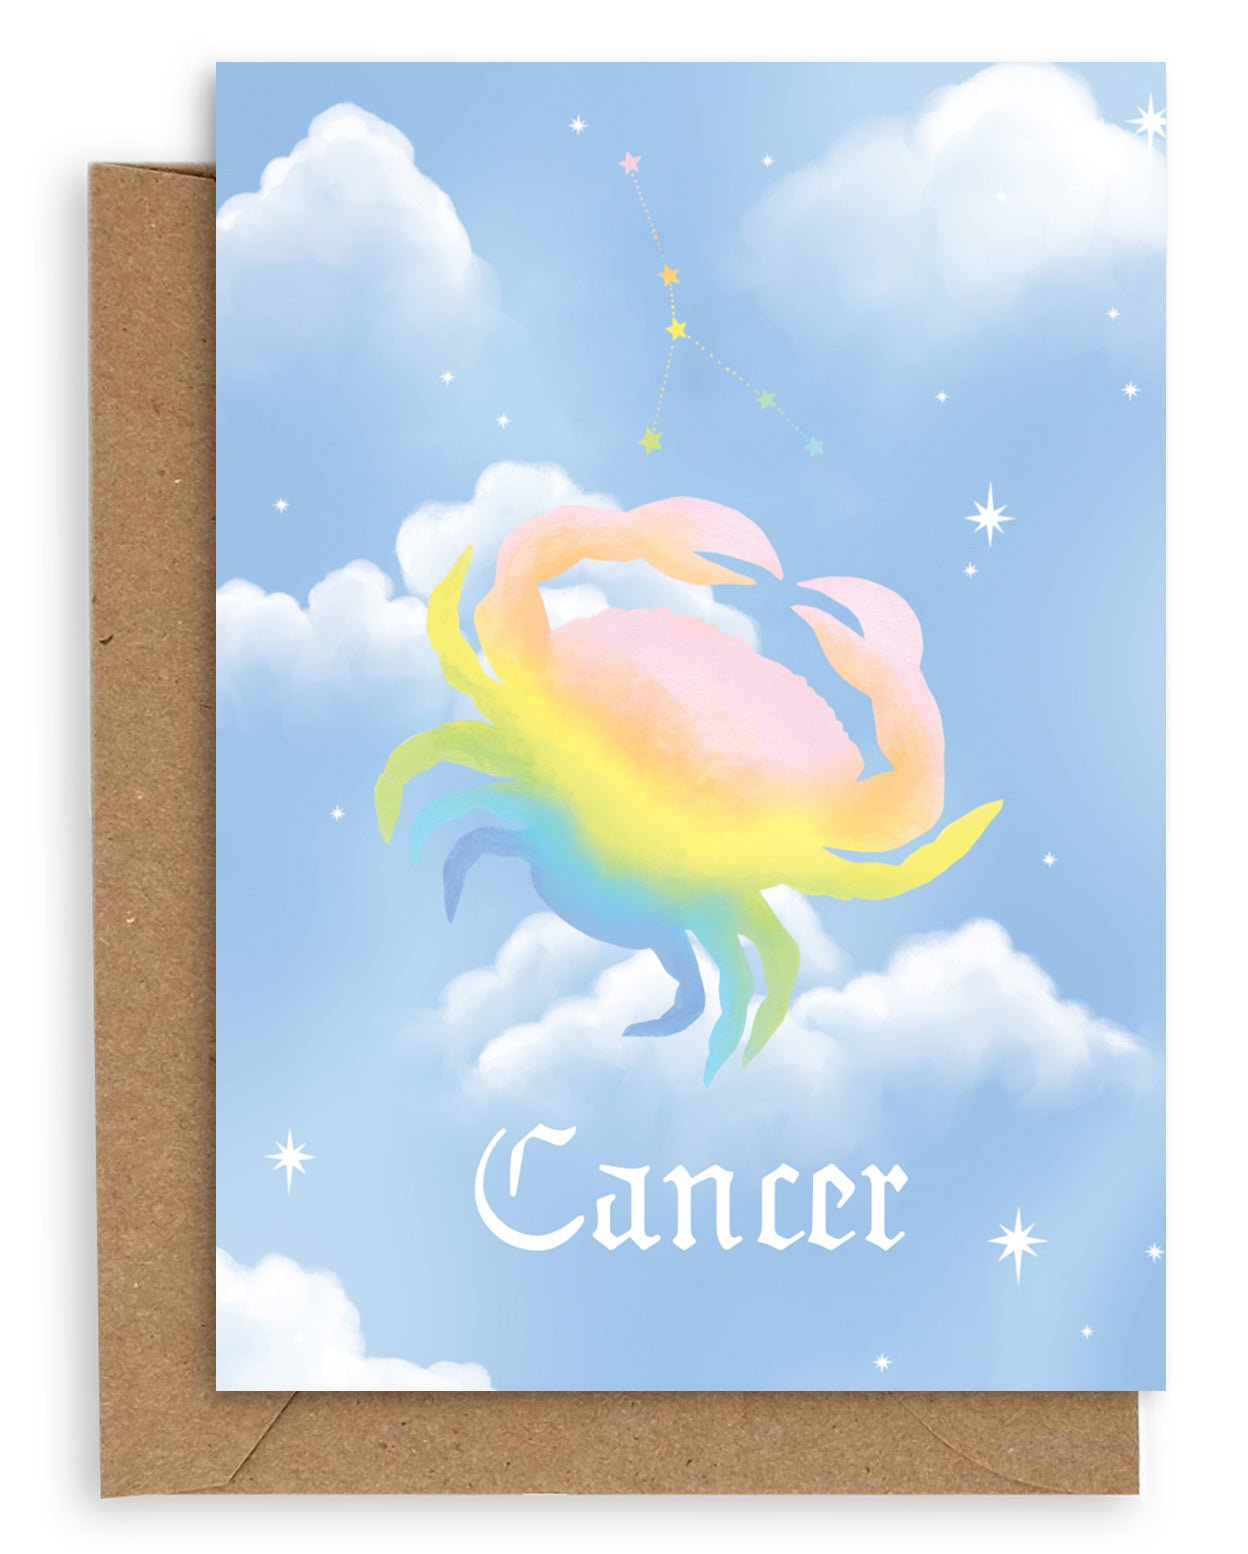 Cancer  Horoscope card with a kraft envelope. The horoscope symbol is painted in rainbow pastel on a blue background with white clouds. 